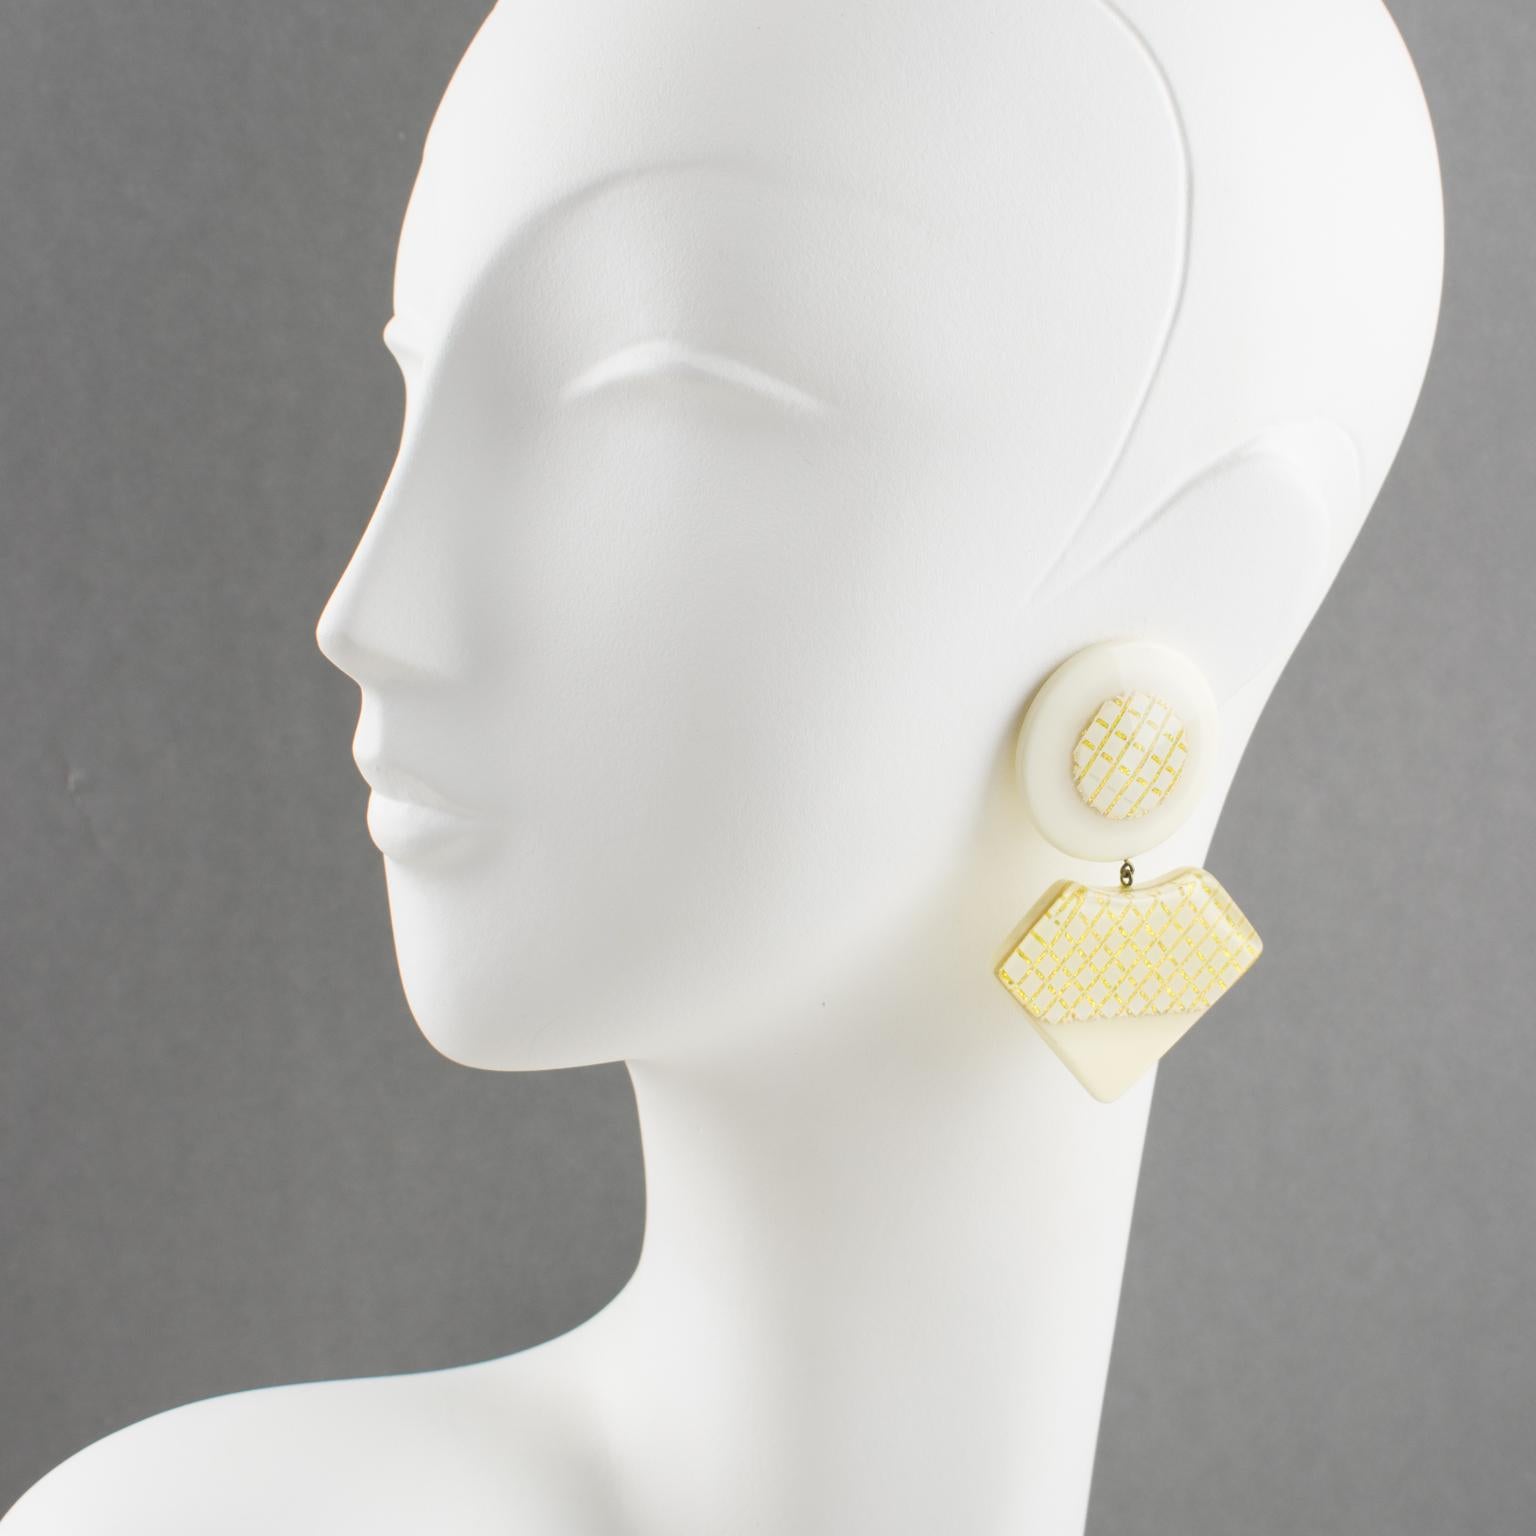 Lovely oversized Lucite clip-on earrings. Features geometric dangling elements in the cream-off-white color background with geometric gilt embedded design. There is no visible maker's mark.
Measurements: 1.94 in wide (4.9 cm) x 2.75 in high (7 cm).